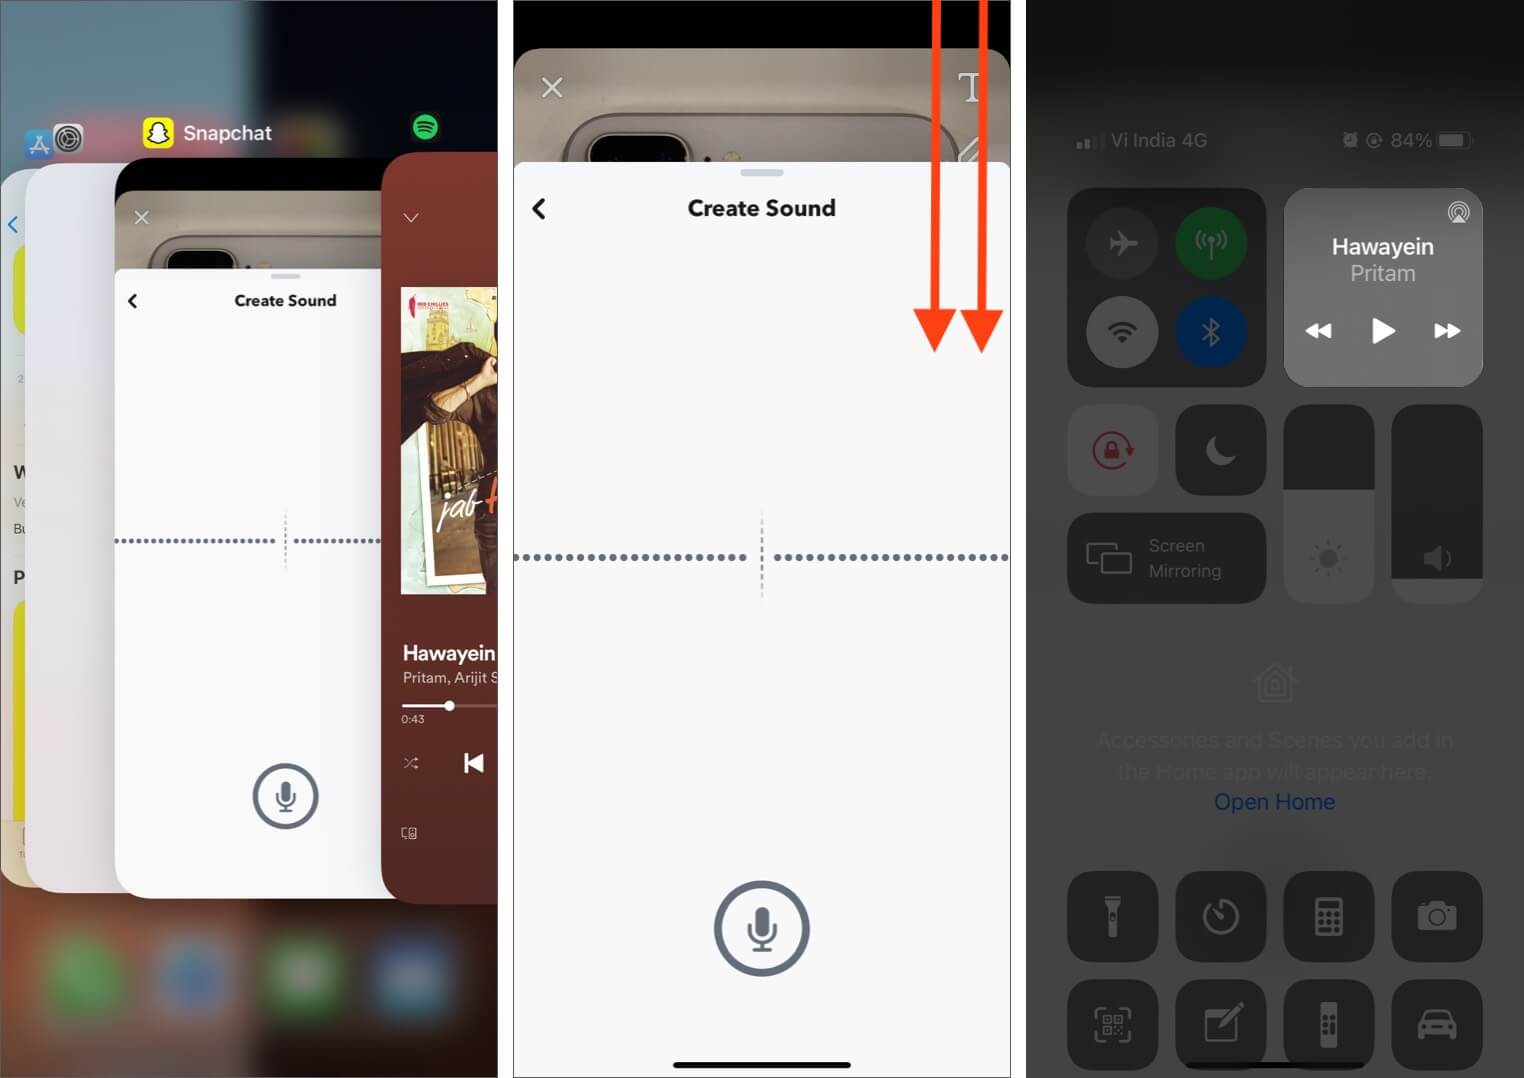 Open App Switcher Tap on Snapchat and Then Open Control Center to Play Music on iPhone